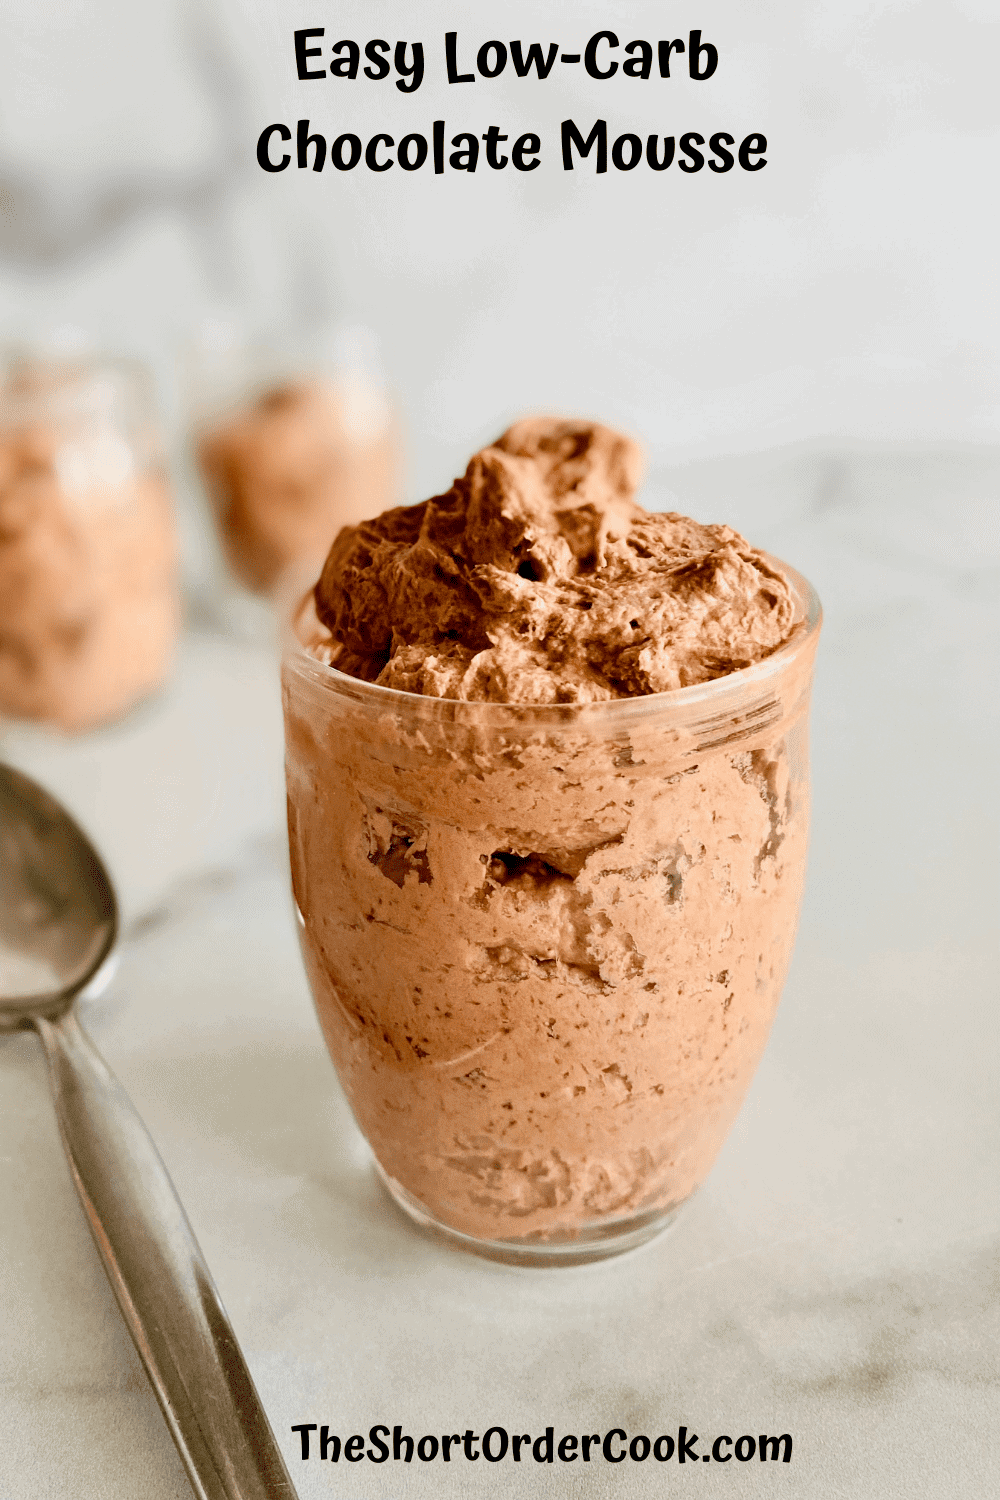 Chocolate mousse in a jar on a table with a spoon